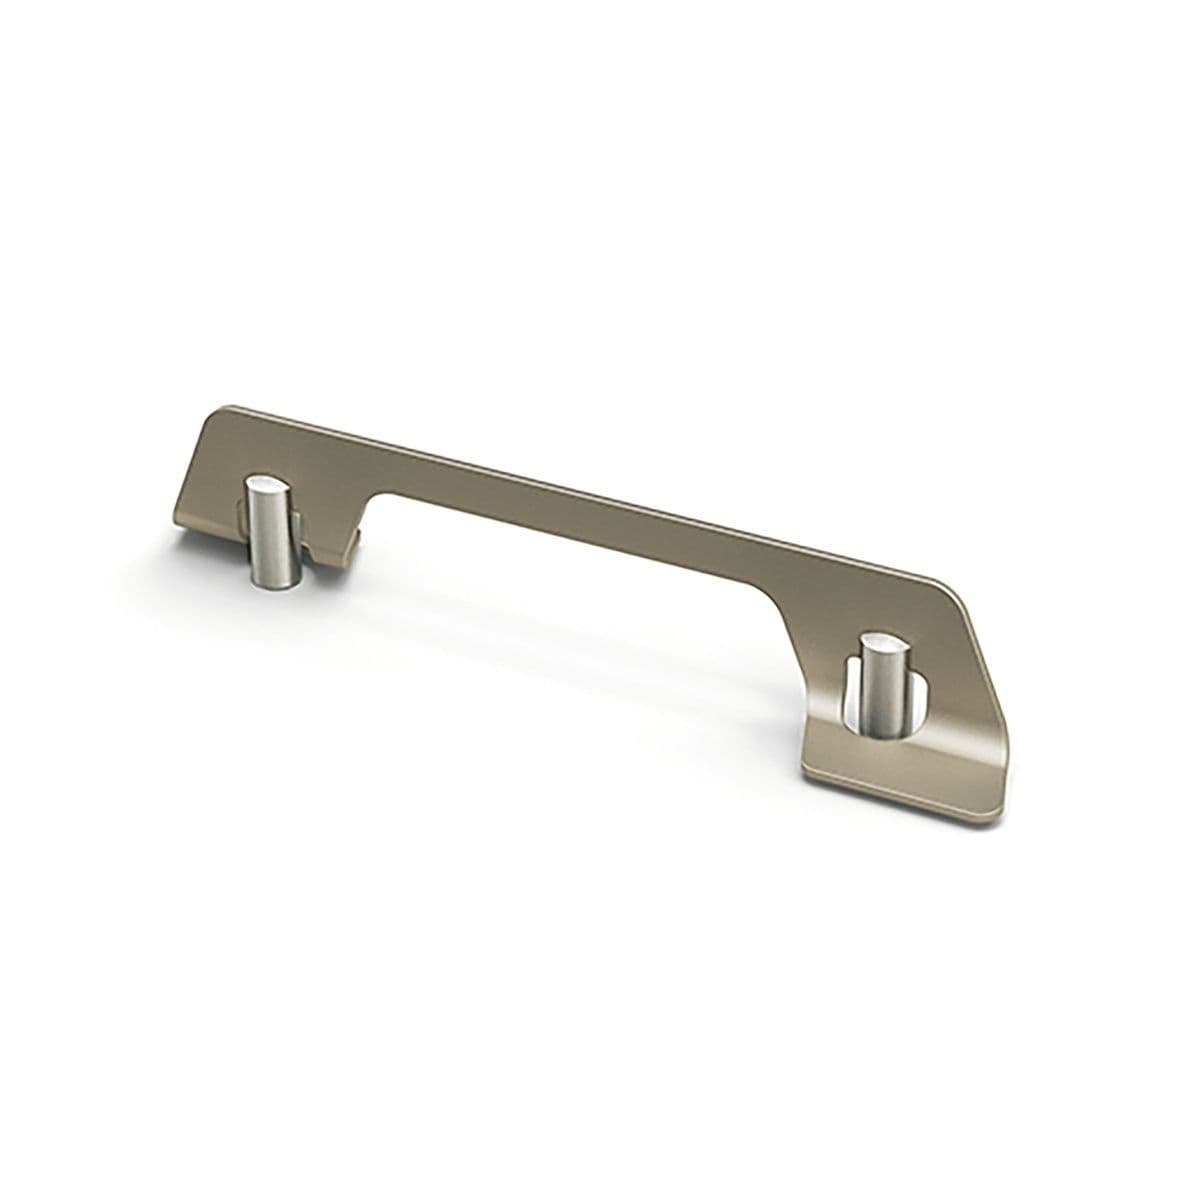 CECINA D Cupboard Handle - 160mm h/c size - BRUSHED STAINLESS STEEL / CHAMPAGNE finish (HETTICH - Deluxe)